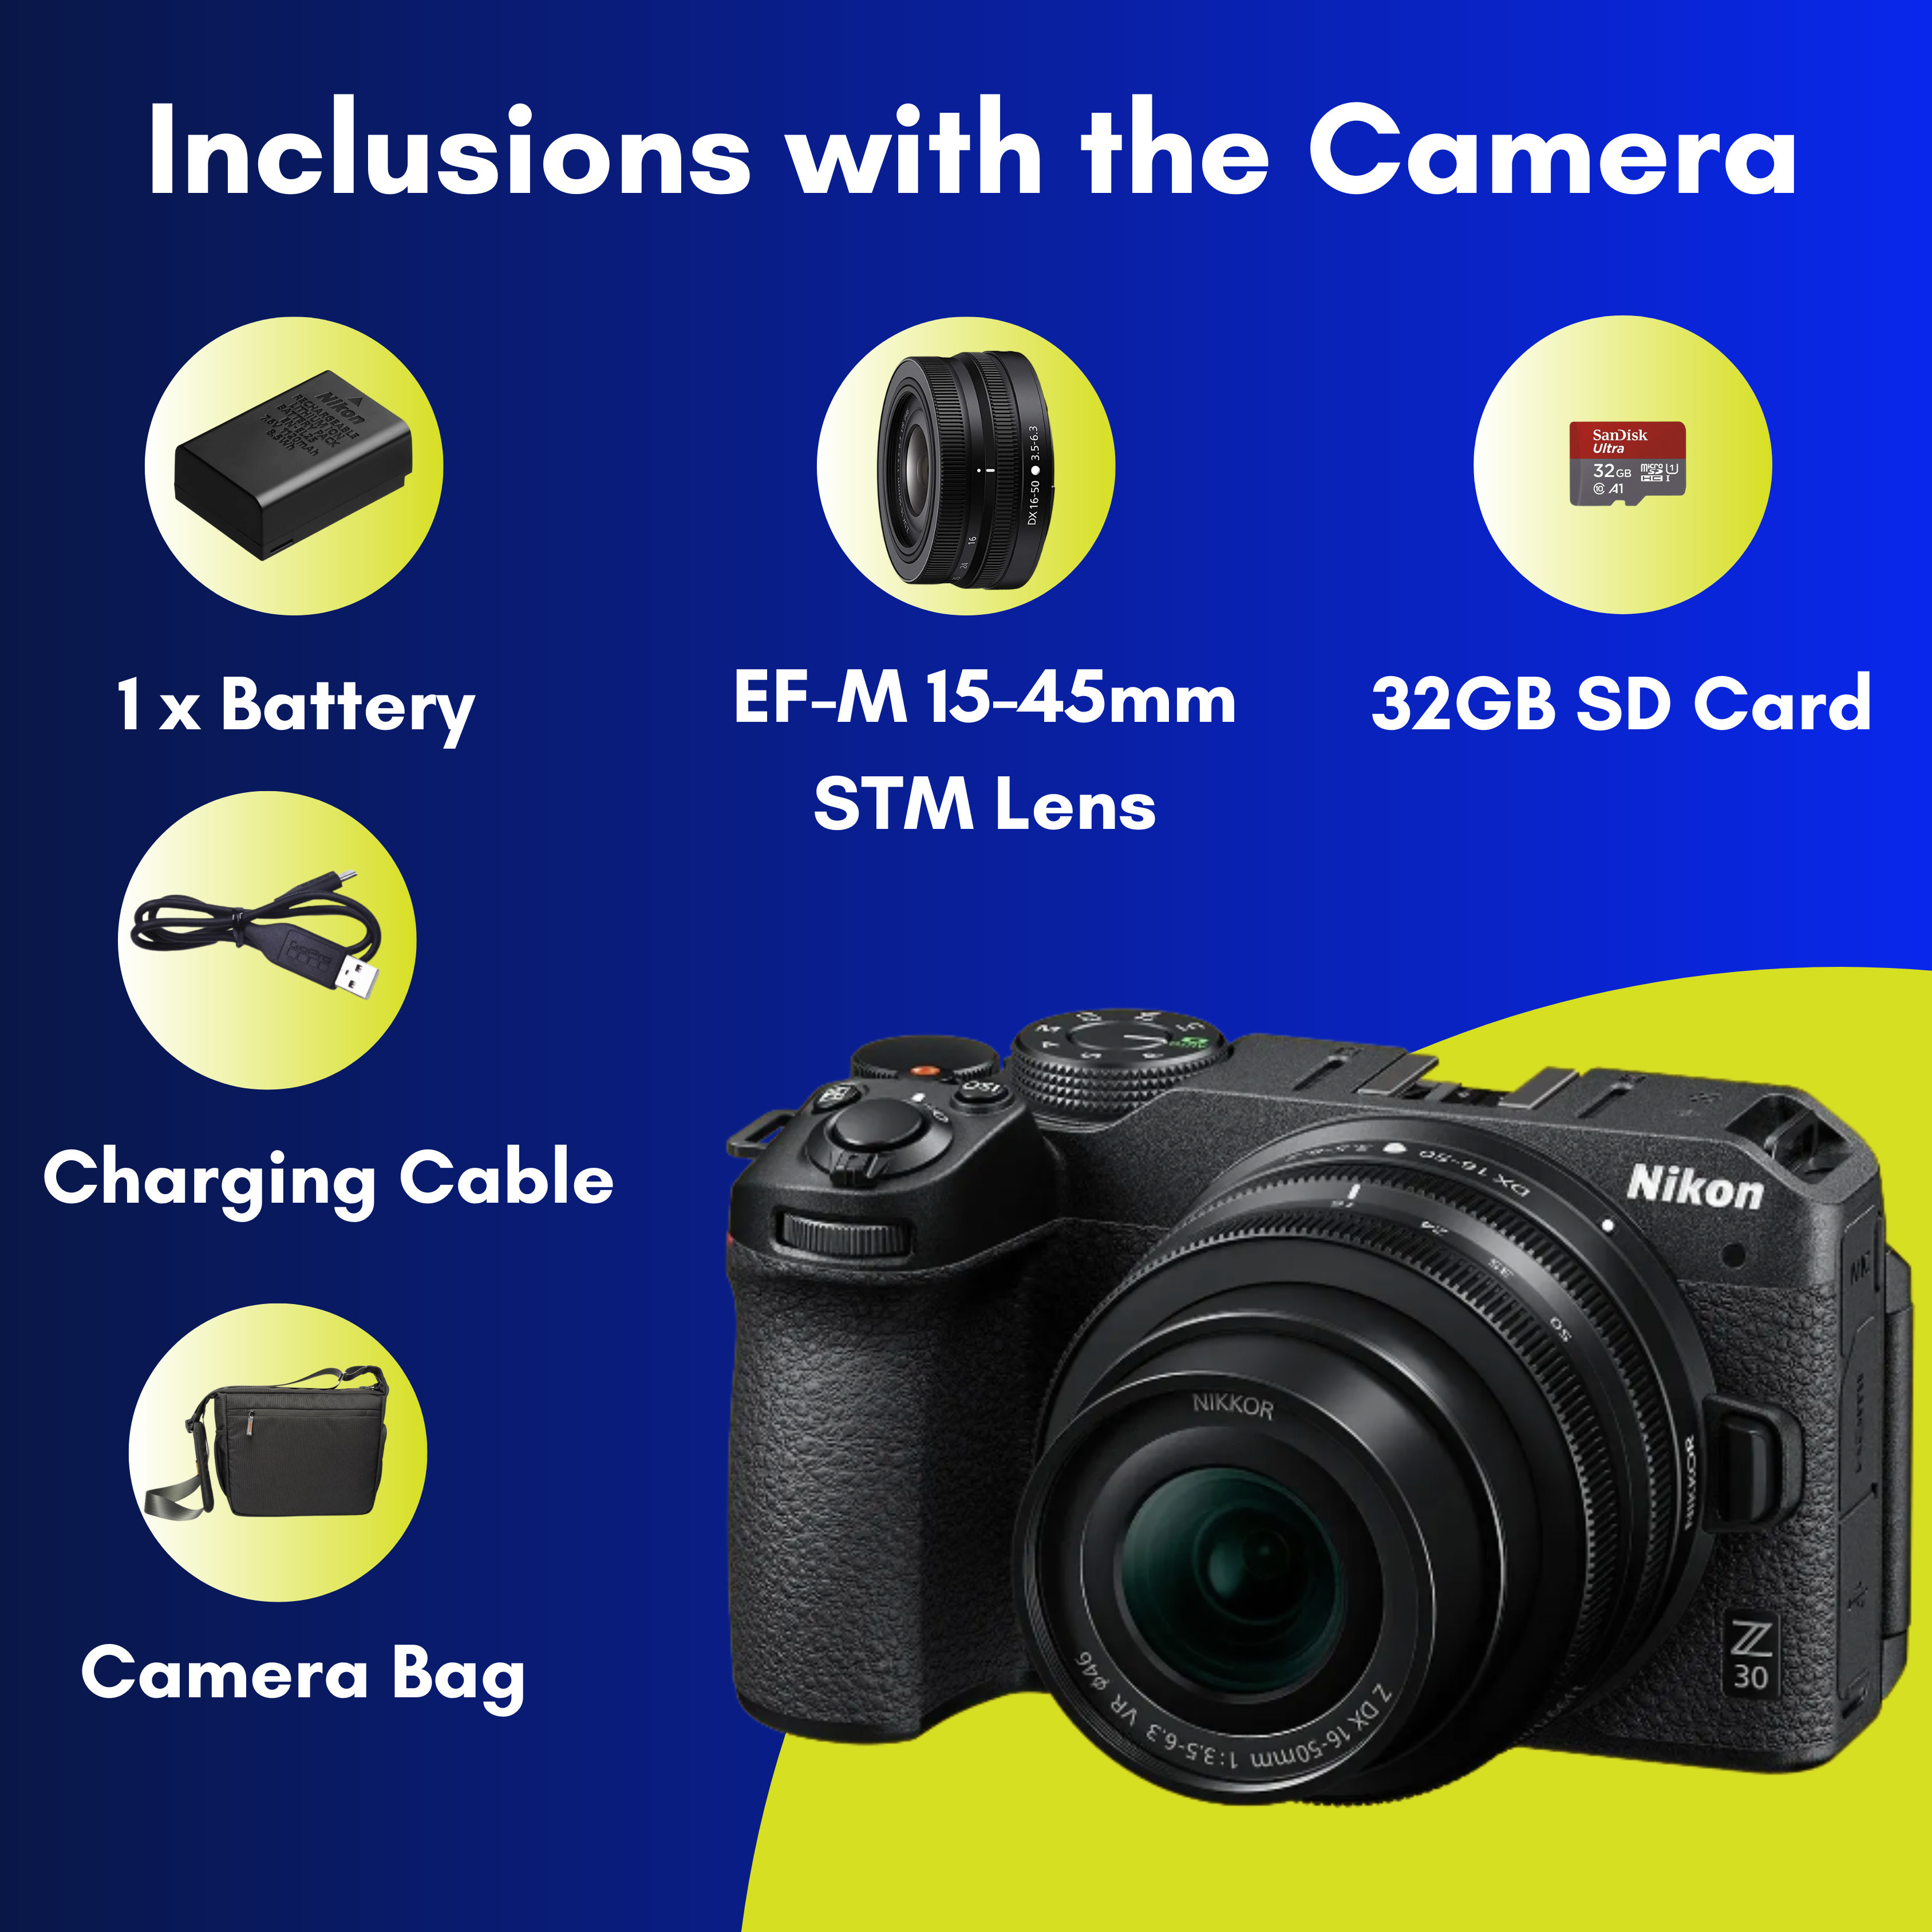 These are product images of Nikon Z30 Camera on rent by SharePal.